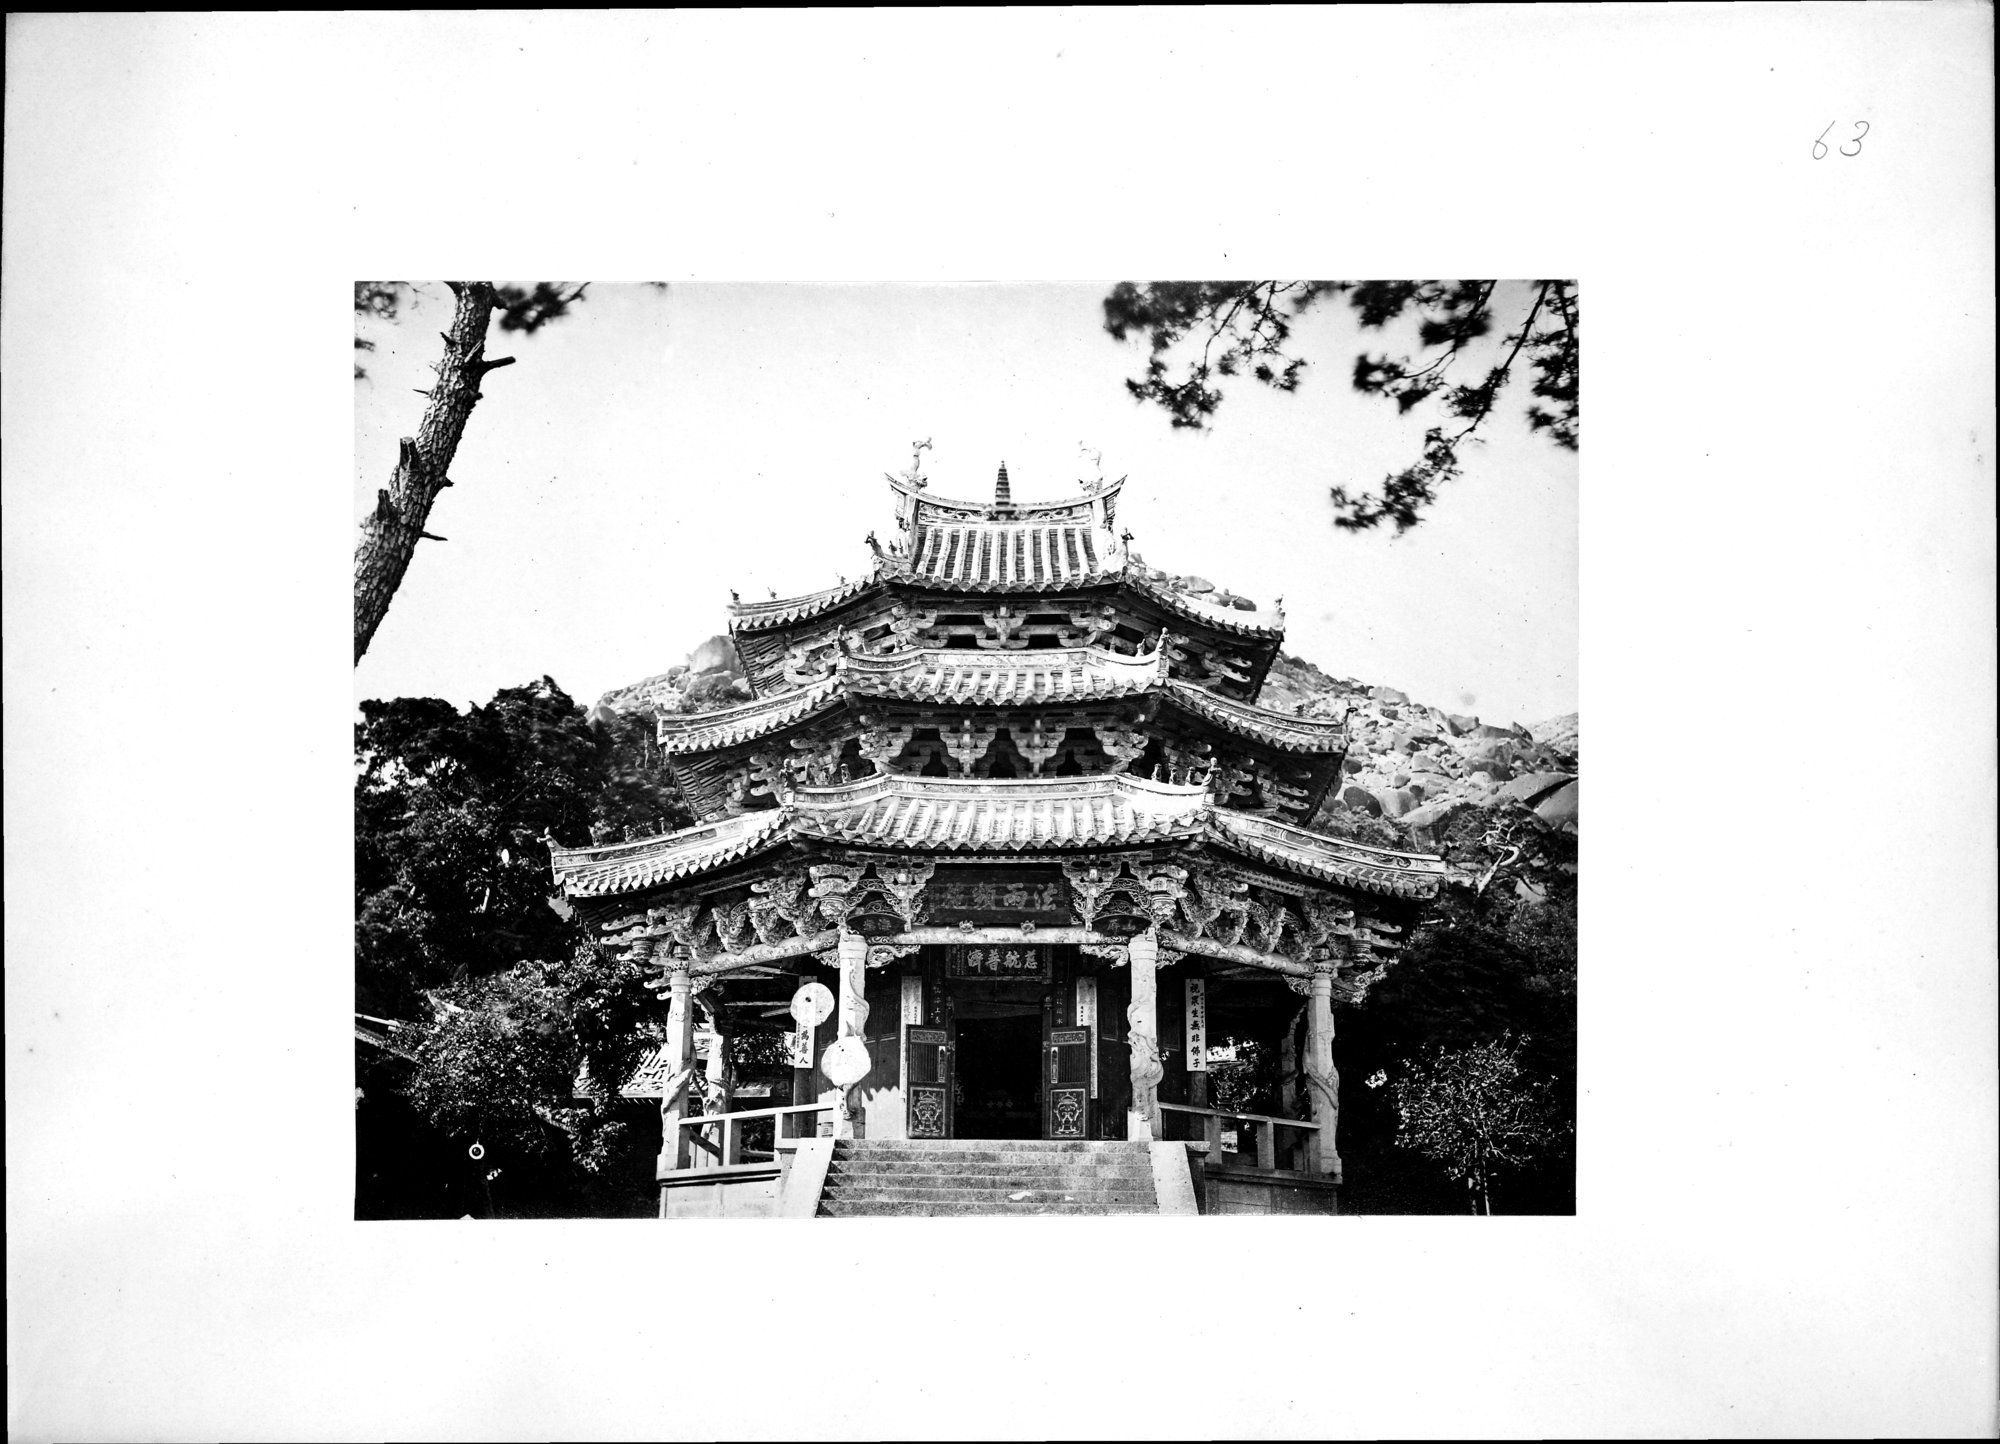 Album of Hongkong Canton Macao Amoy Foochow : vol.1 / Page 65 (Grayscale High Resolution Image)